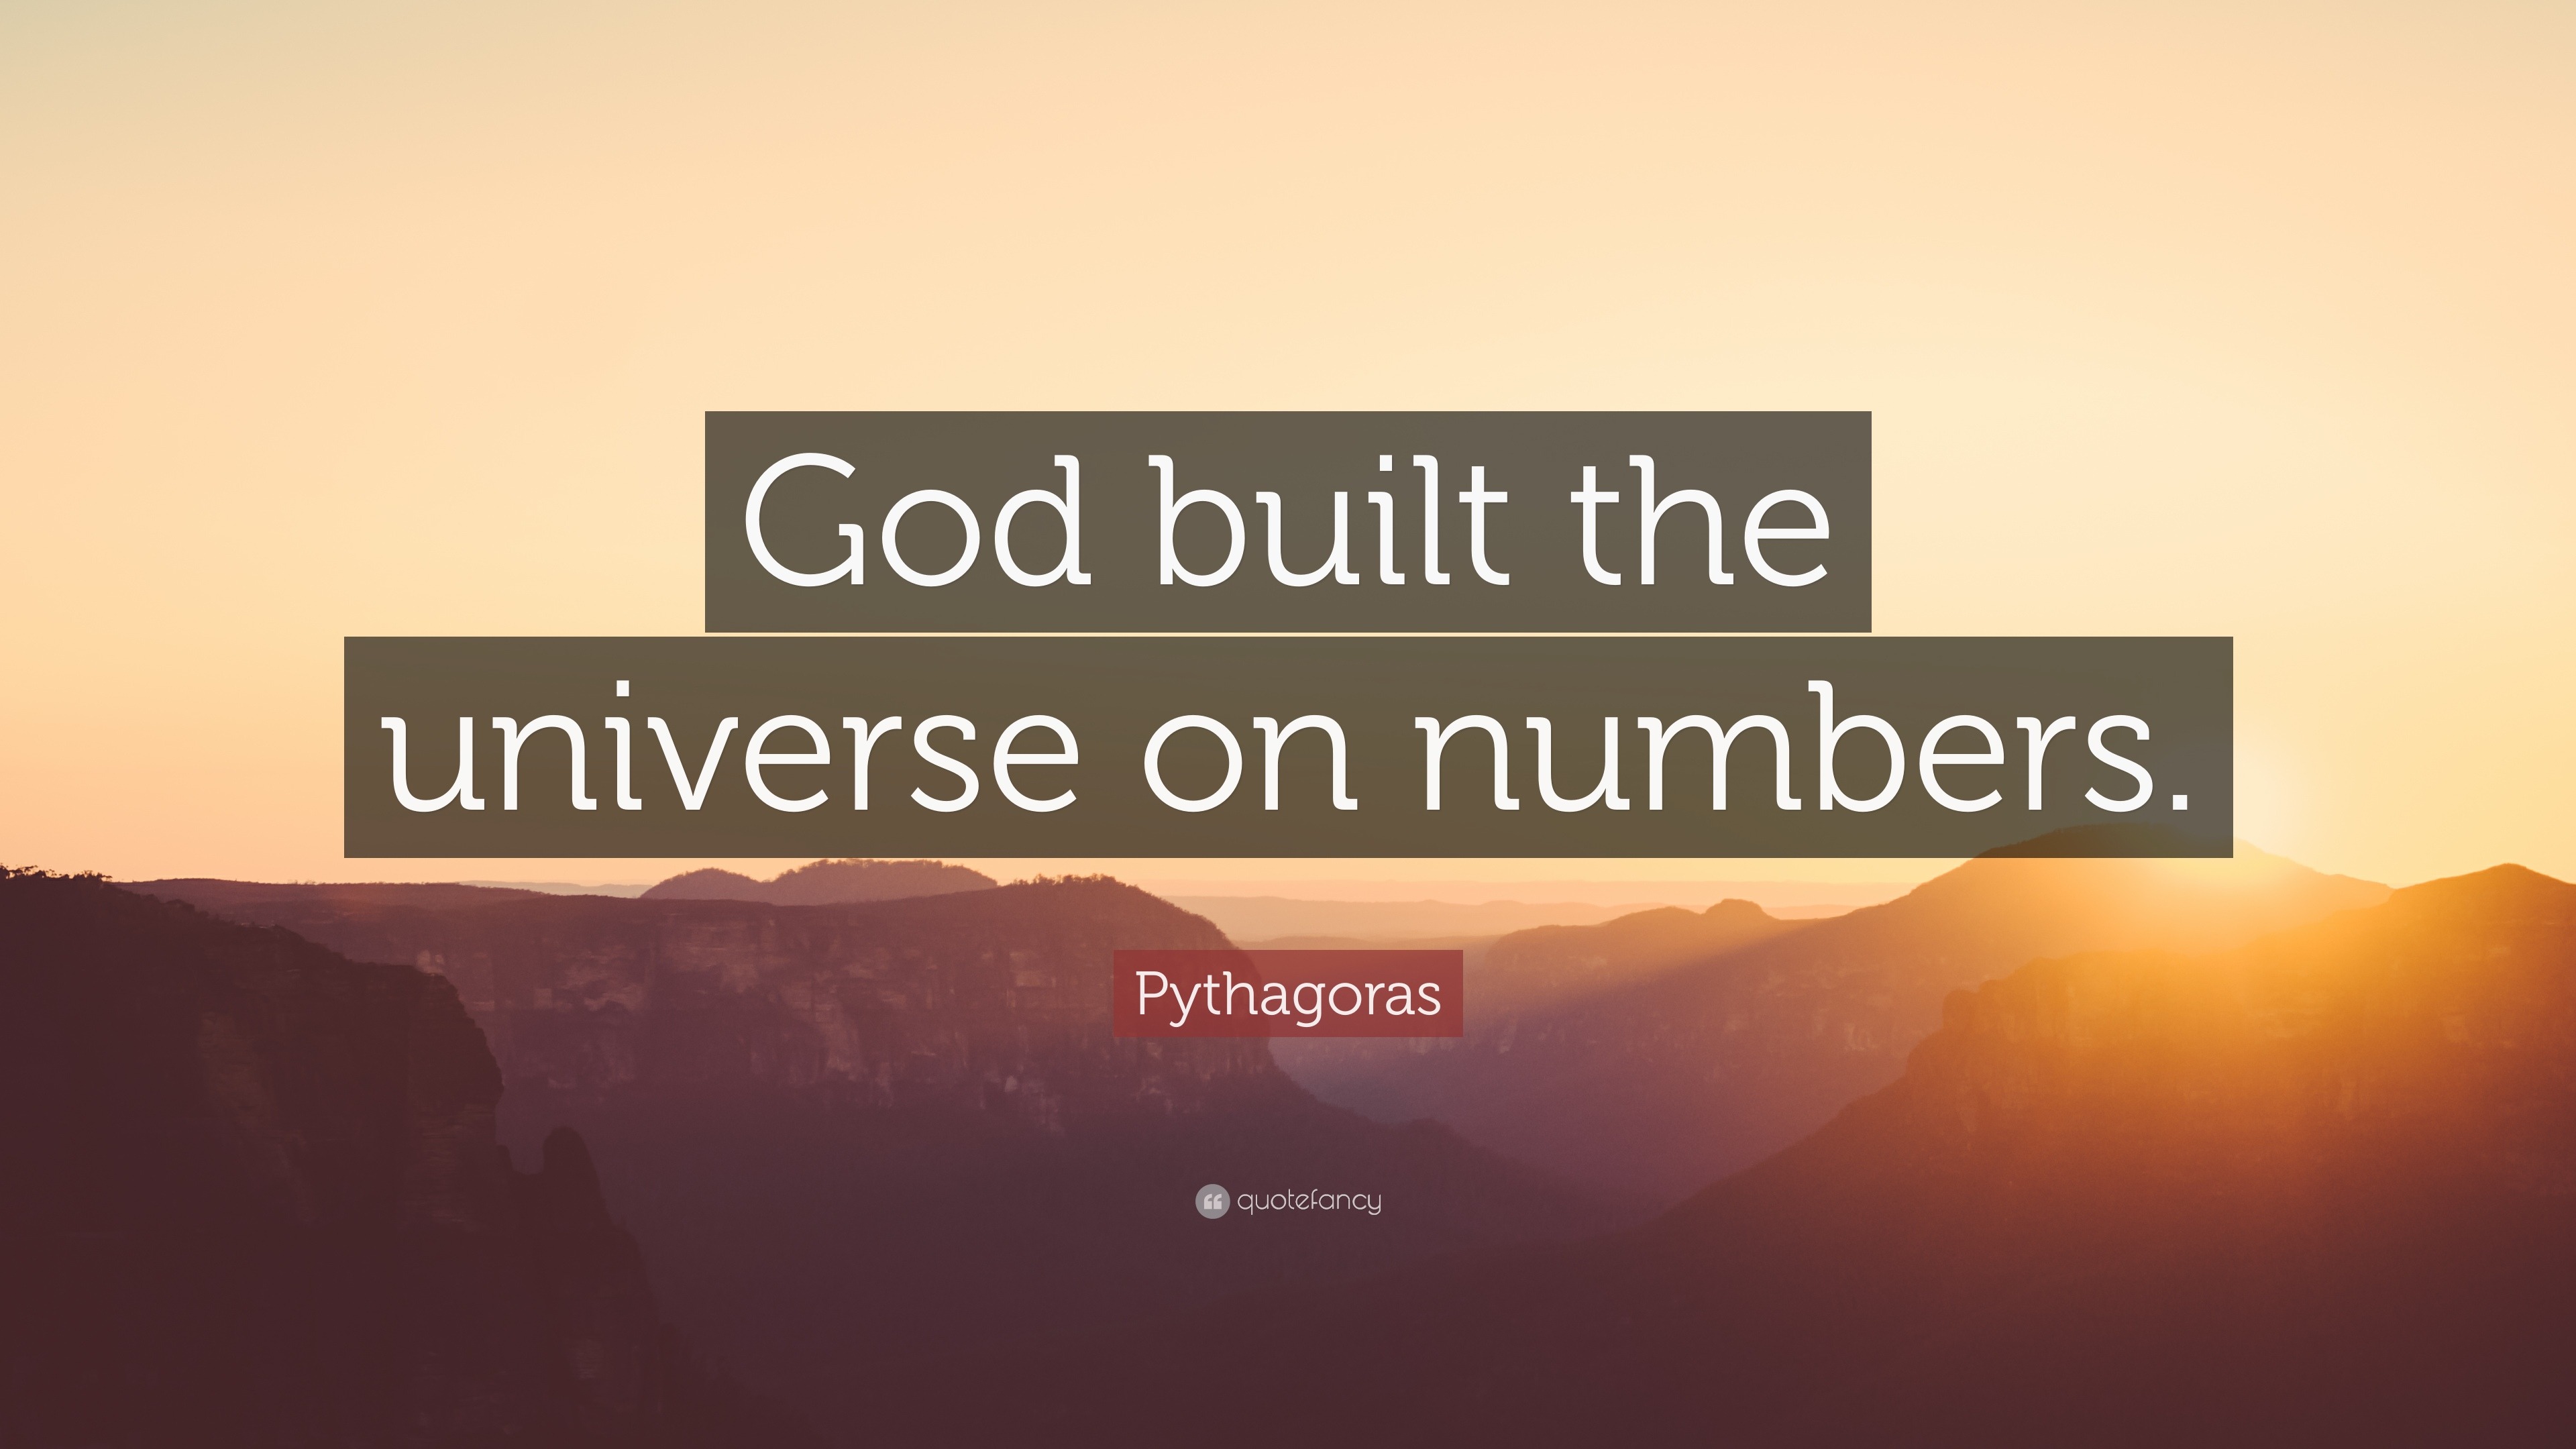 Pythagoras a Universe Made of Numbers